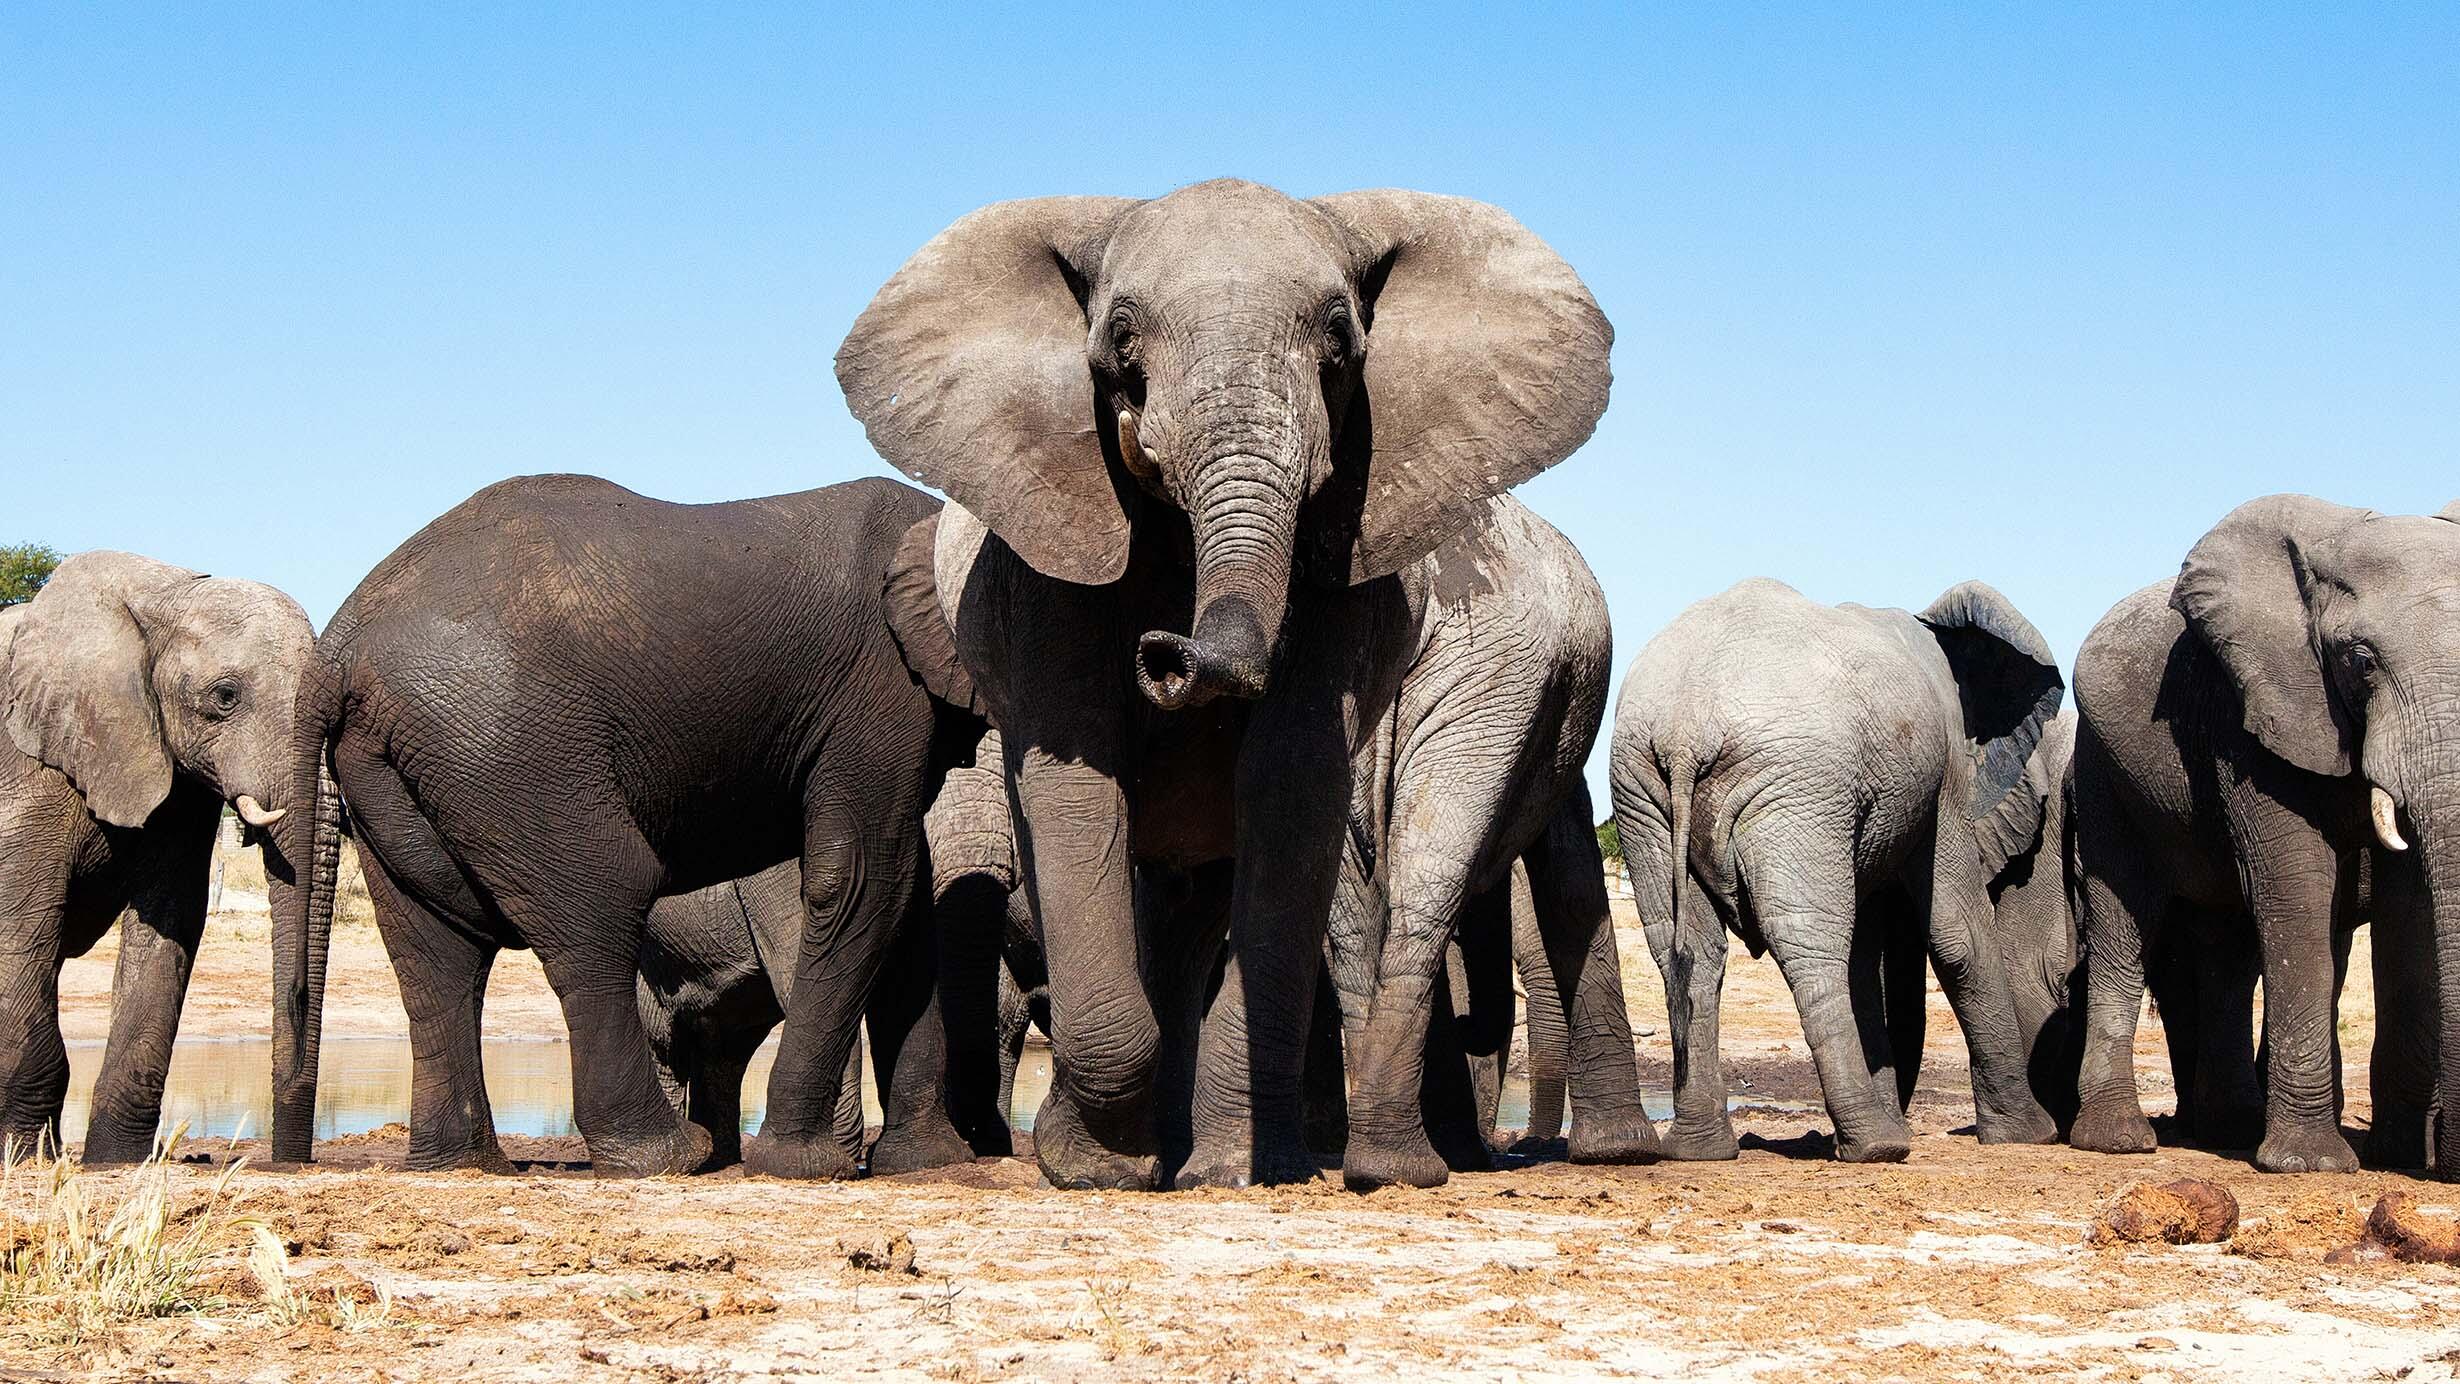 An African elephant with a herd behind it stands facing forward in savanna habitat with a cloudless sky above